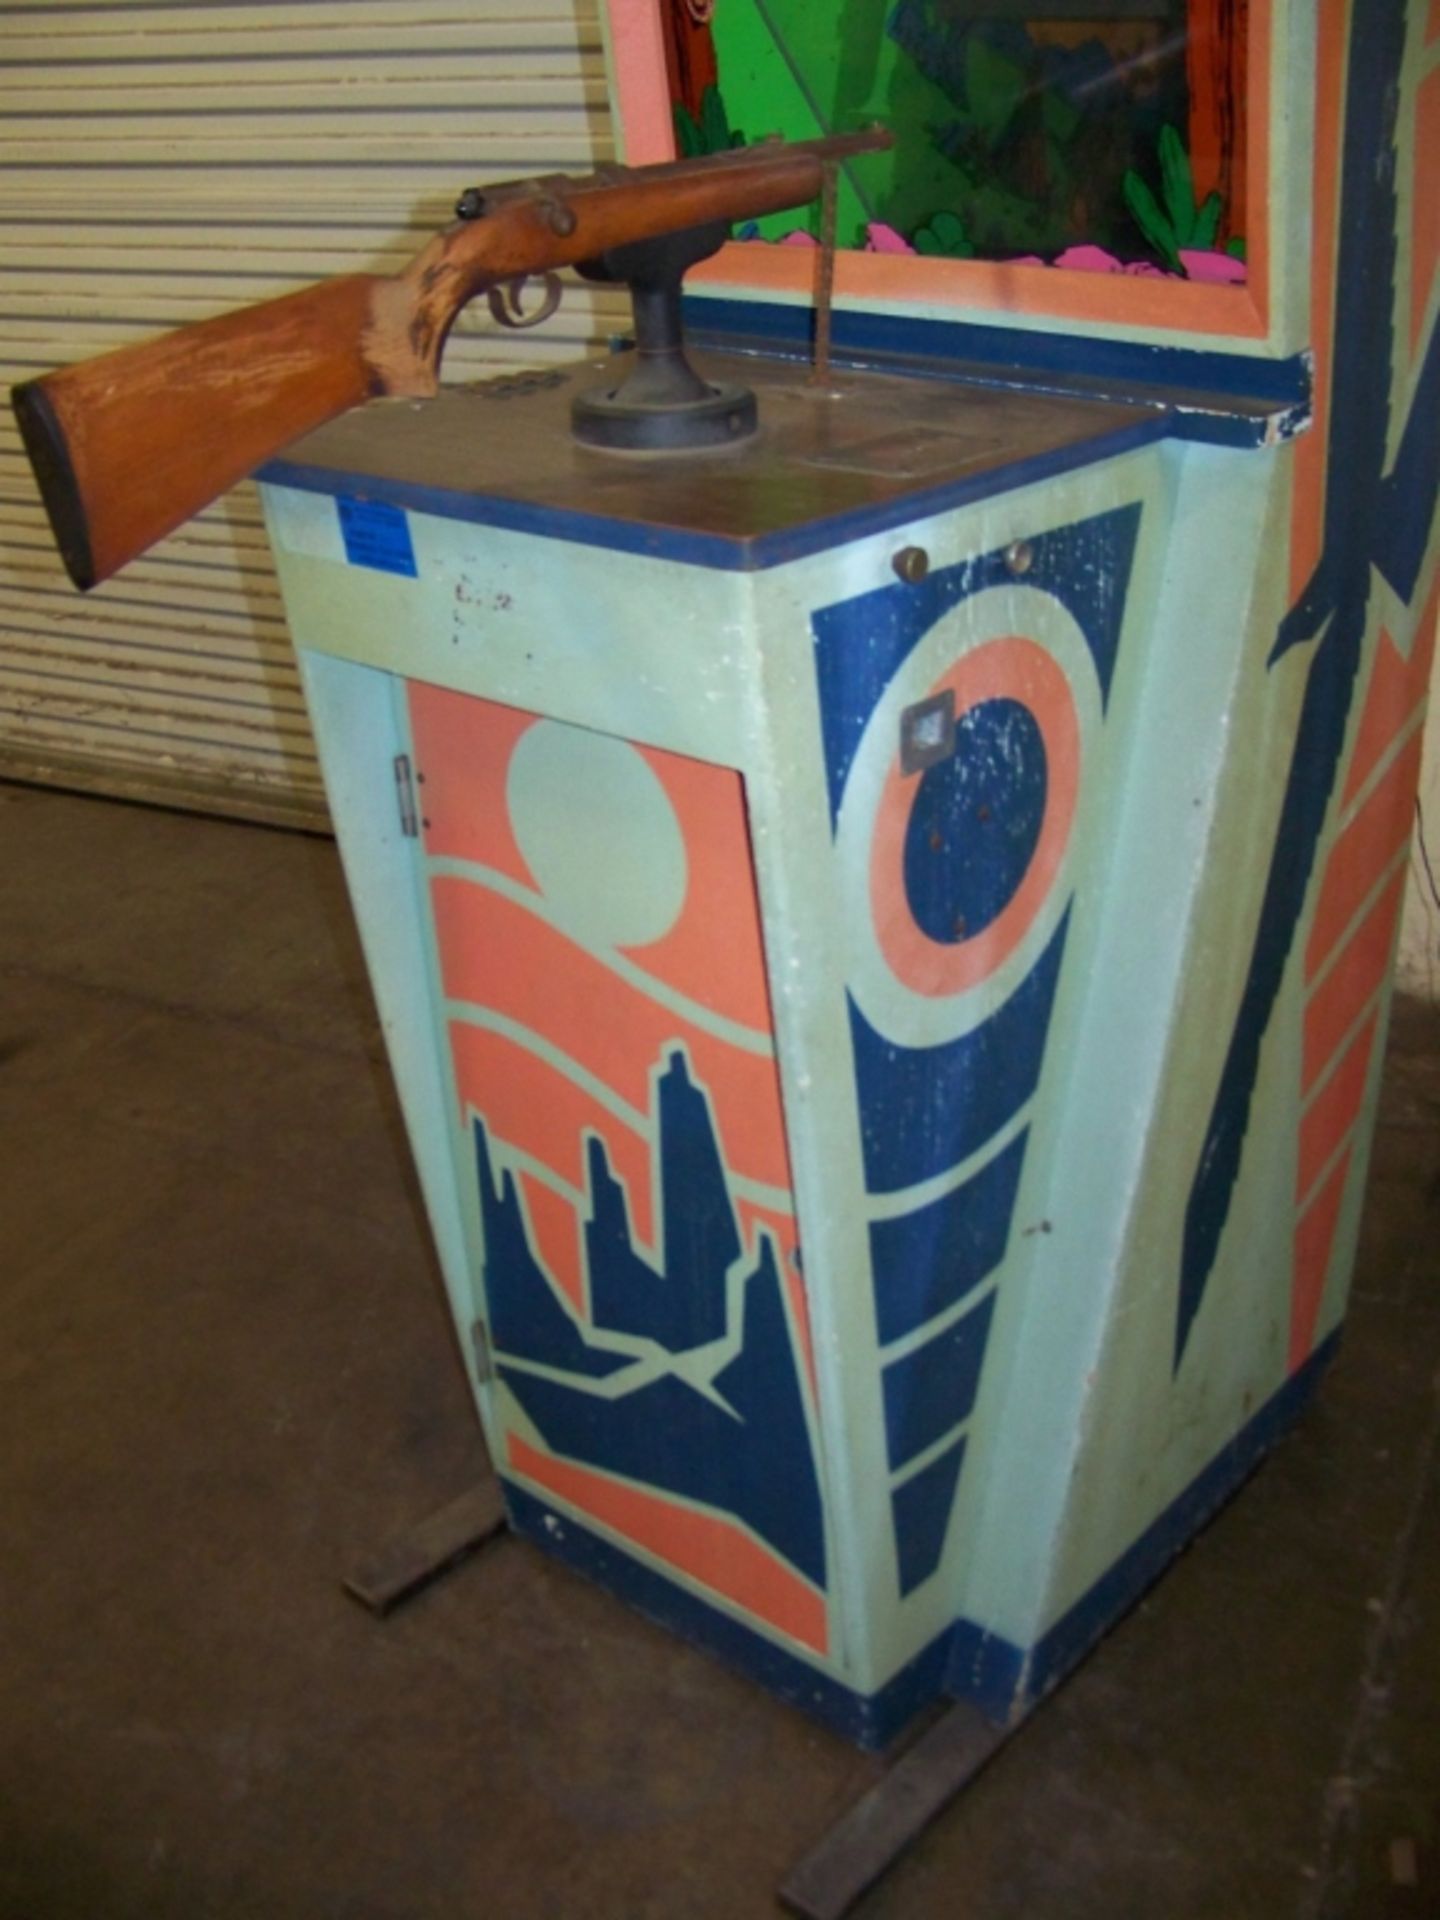 WILD WEST RIFLE ARCADE GAME 1967 CHICAGO COIN E.M. - Image 4 of 7